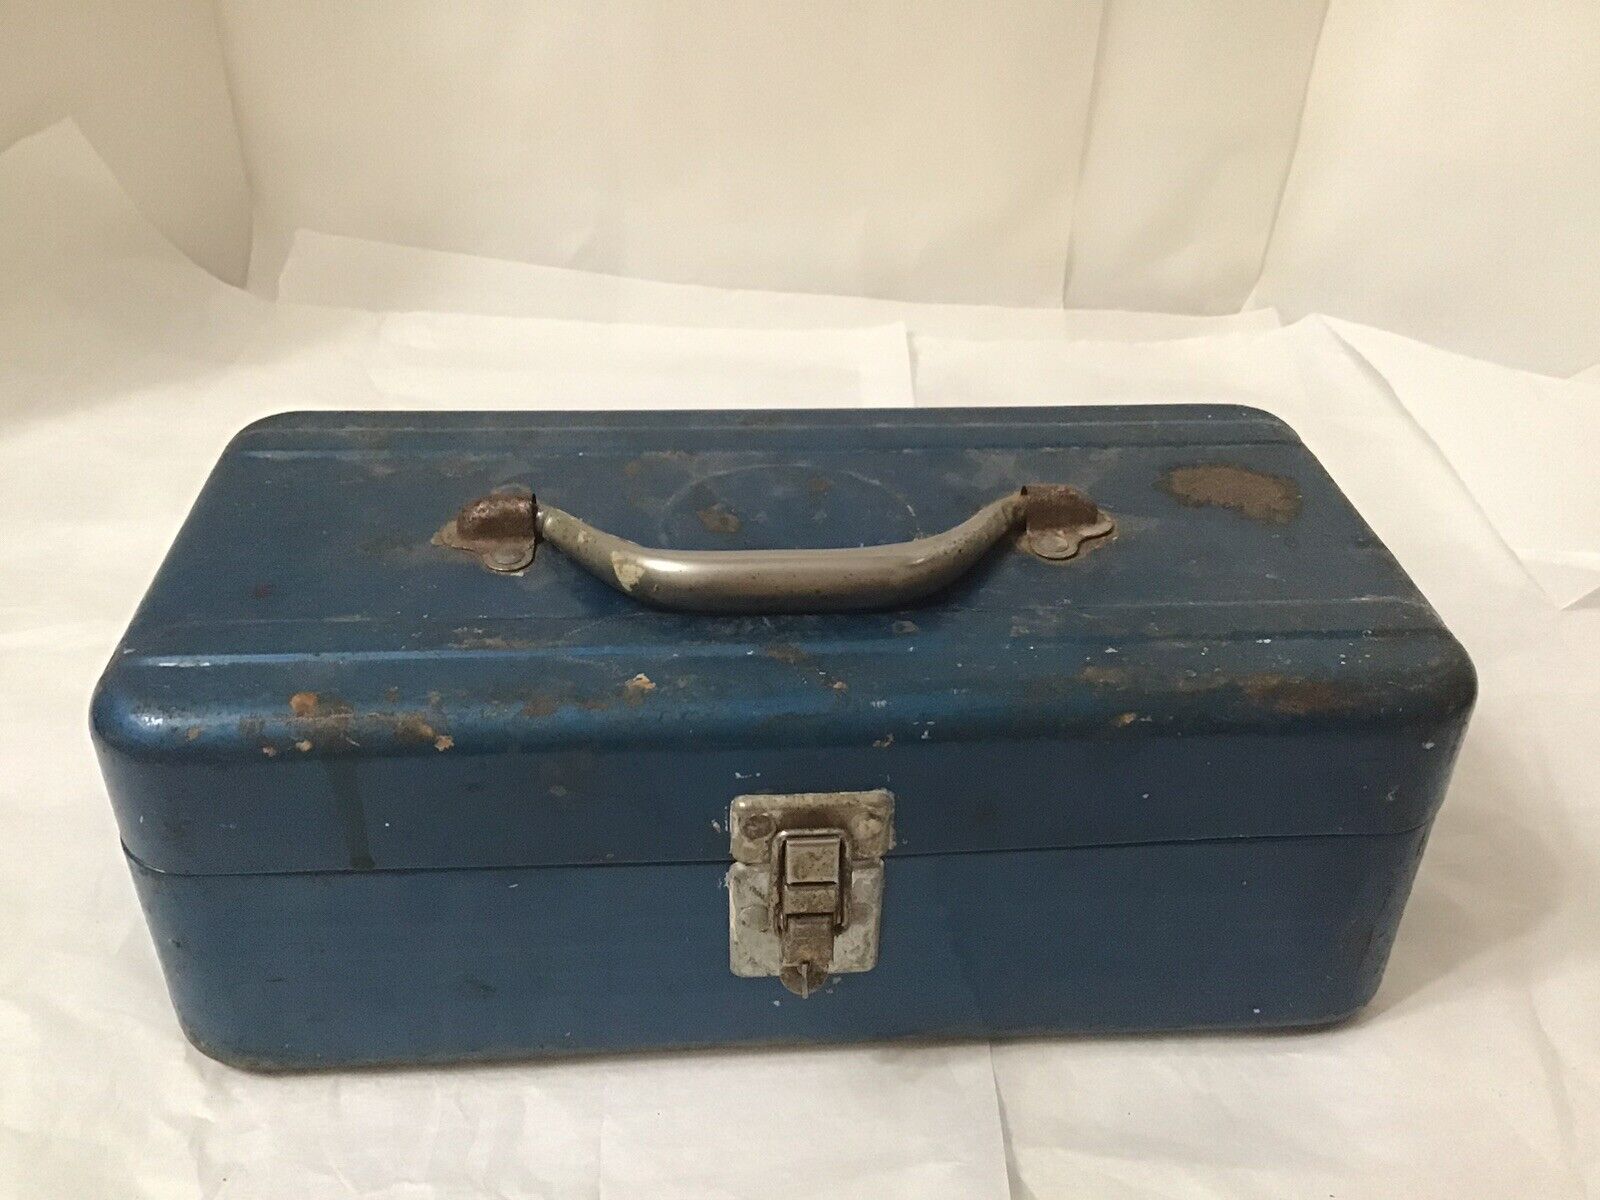 Vintage Blue Steel Tackle or Tool Box 13x7x5, 1 Small Bottom Corner Dent, Rusty